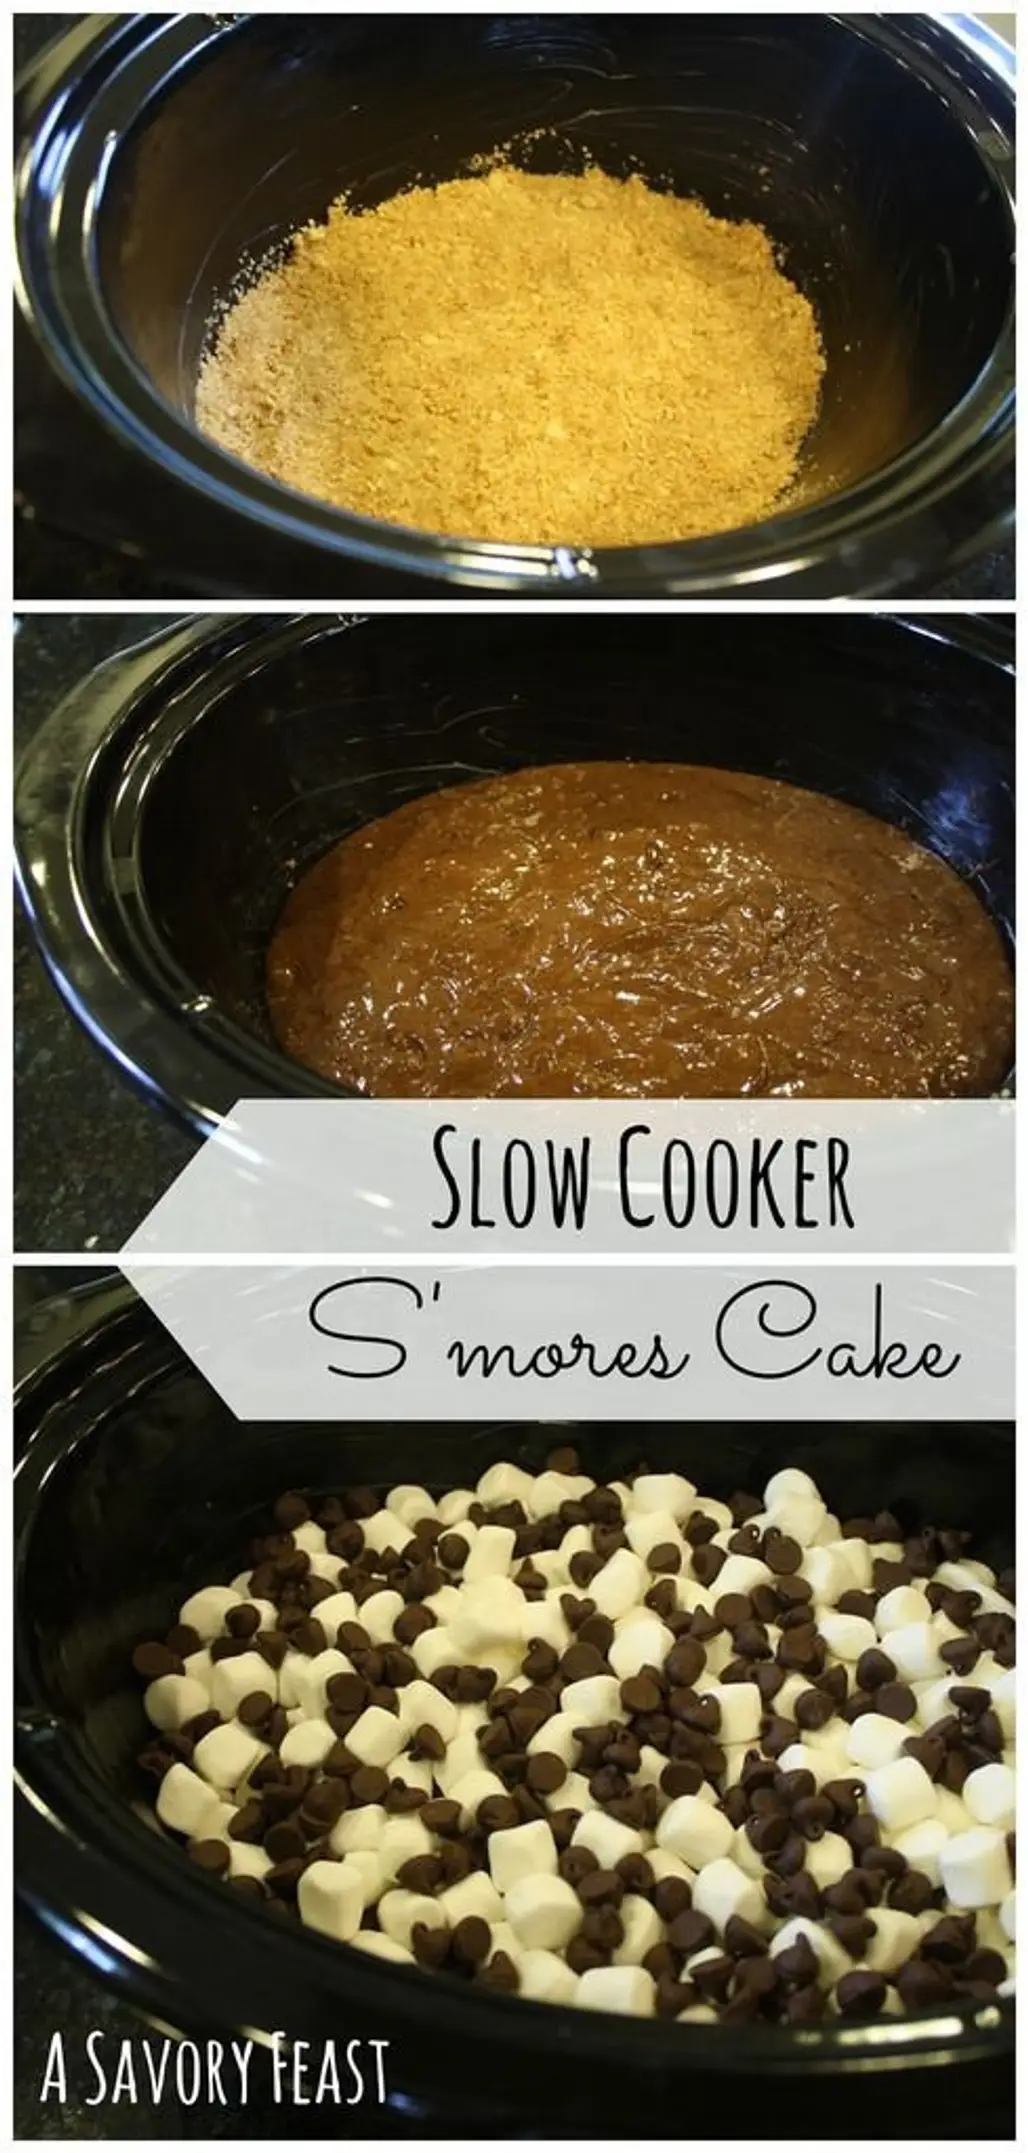 Slow Cooker S'mores Cake!